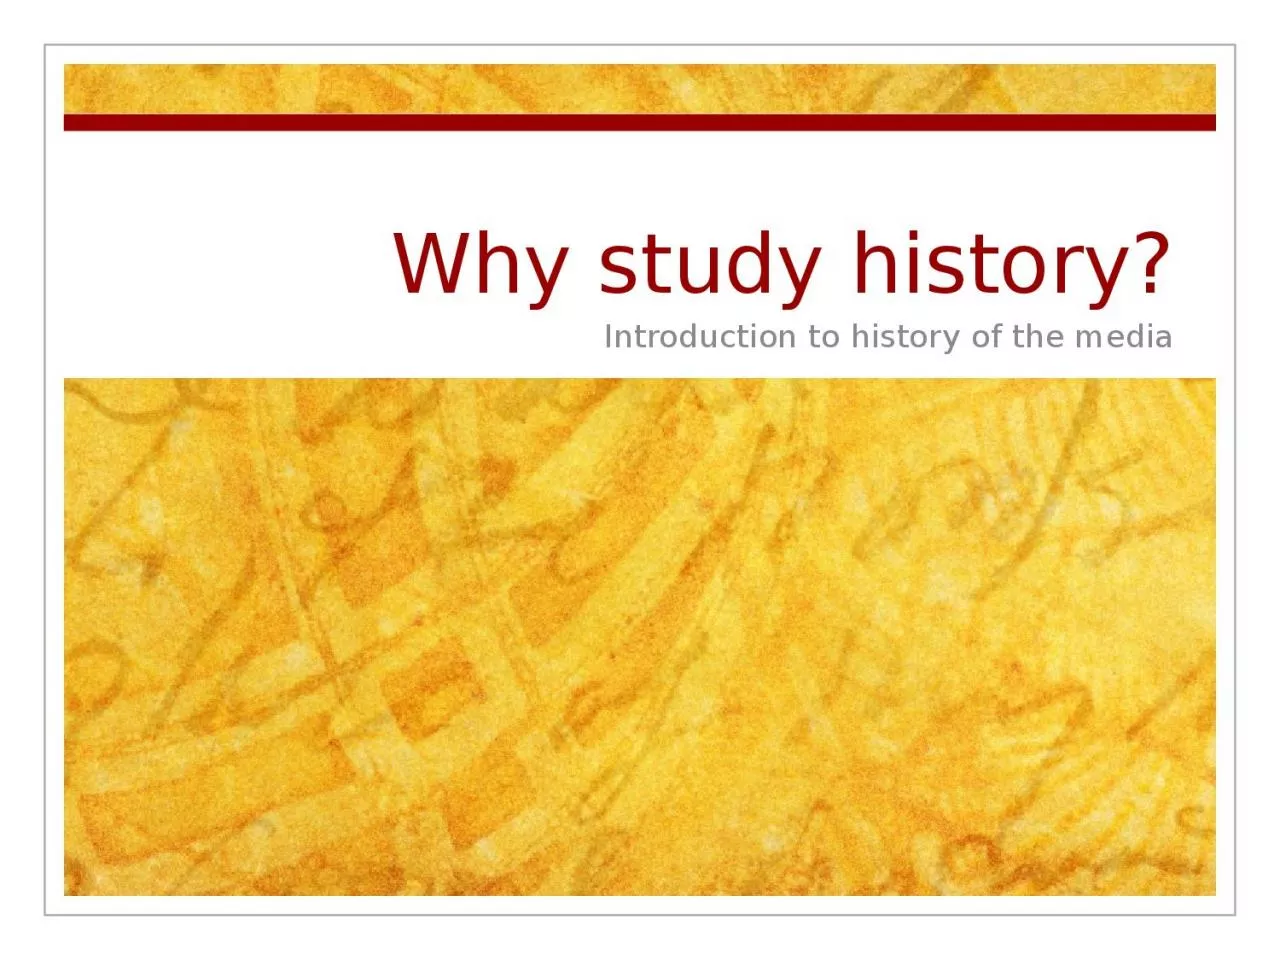 Why study history? Introduction to history of the media